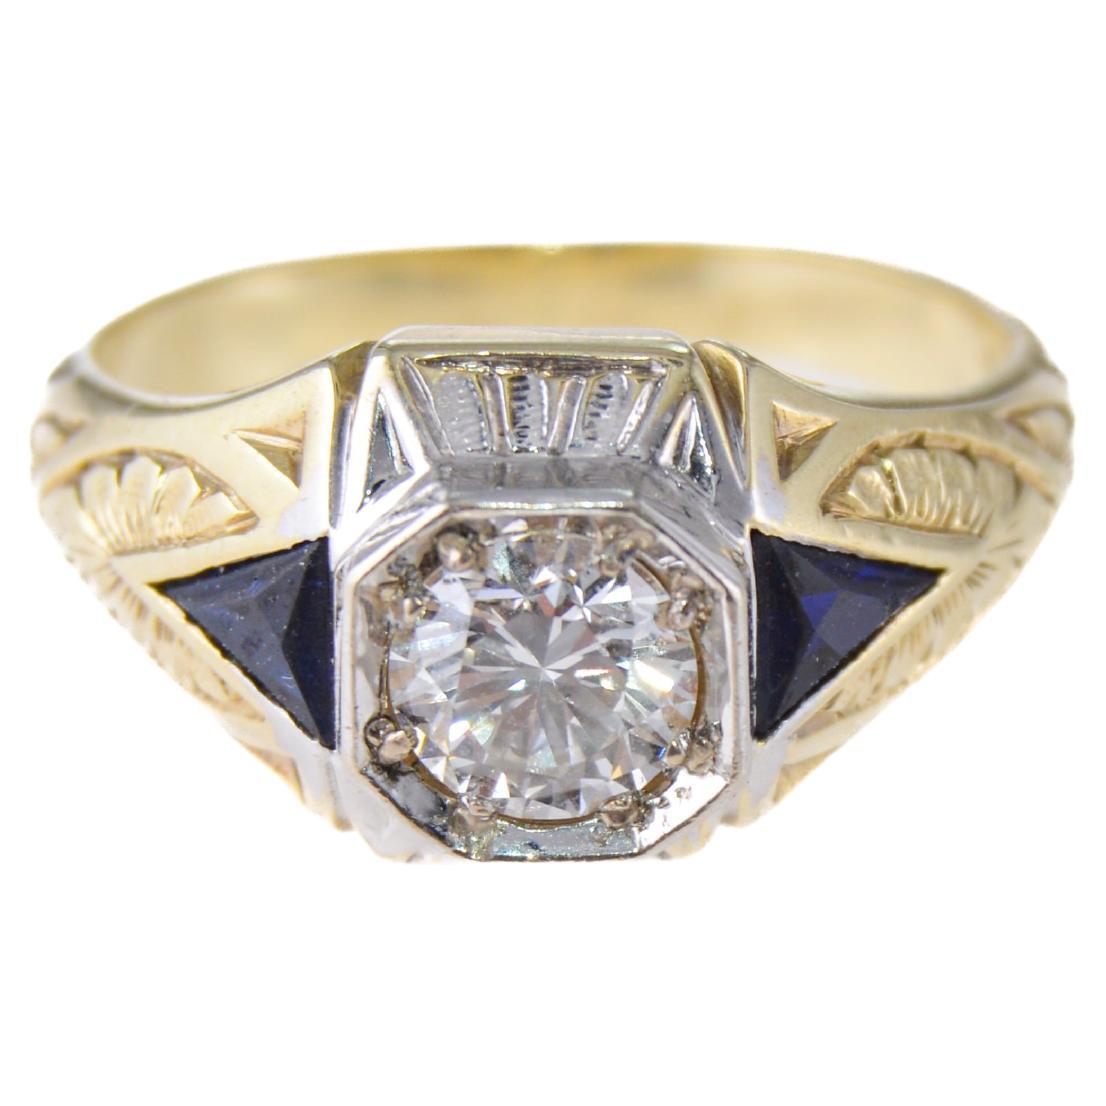 STYLE / REFERENCE: Art Deco Ring
METAL / MATERIAL: 14Kt. Solid Gold 
CIRCA / YEAR: 1930's
CENTER STONE / WEIGHT: .7 Cts.
SIZE:  6.25

LIFETIME SERVICE COMMITMENT

This ladies Classic Art Deco Diamond ring in 14K yellow and white gold is entirely